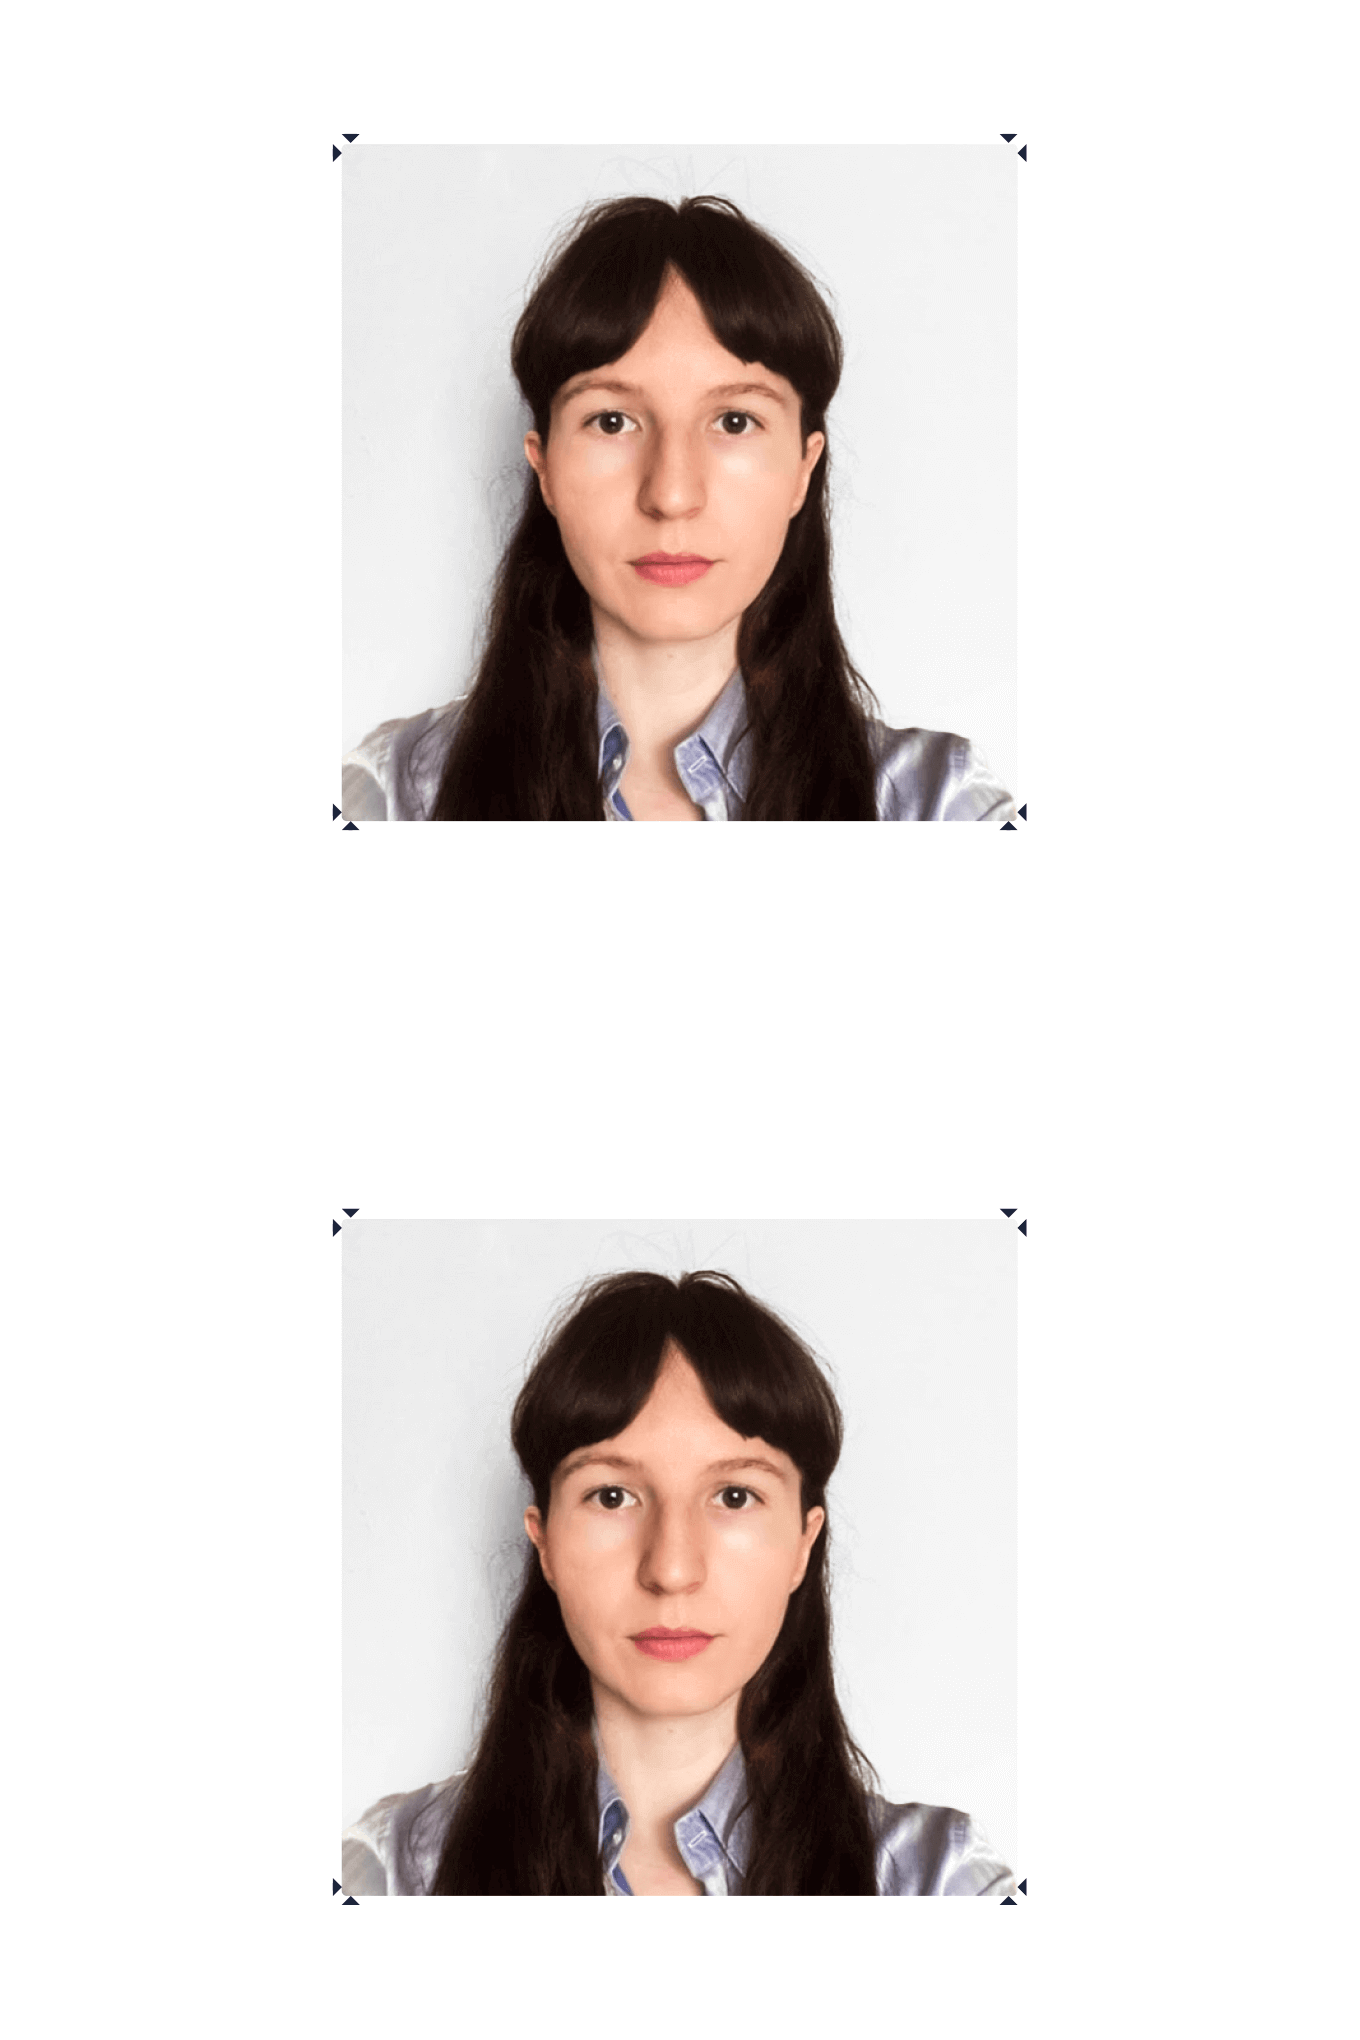 An example of the correct 4x6 passport photo template.